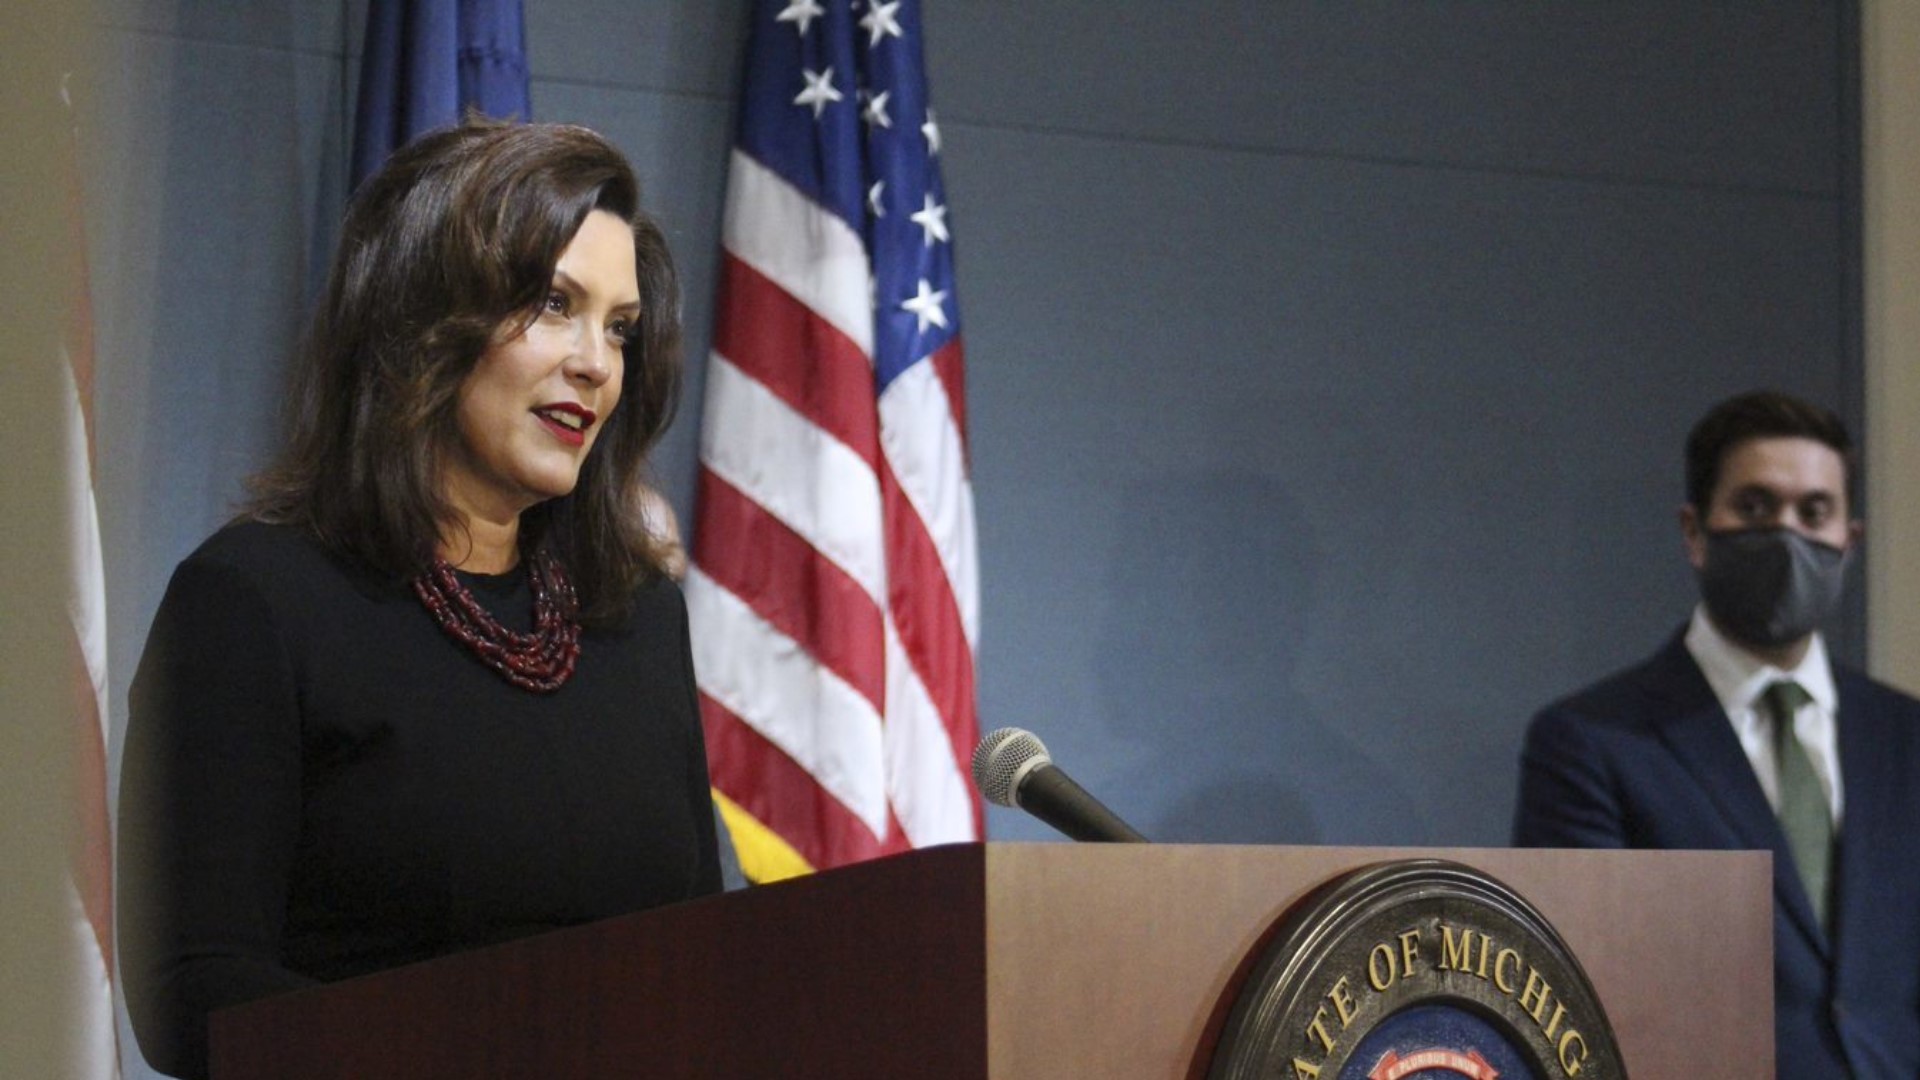 Whitmer responds to Trump, calls for empathy and humanity